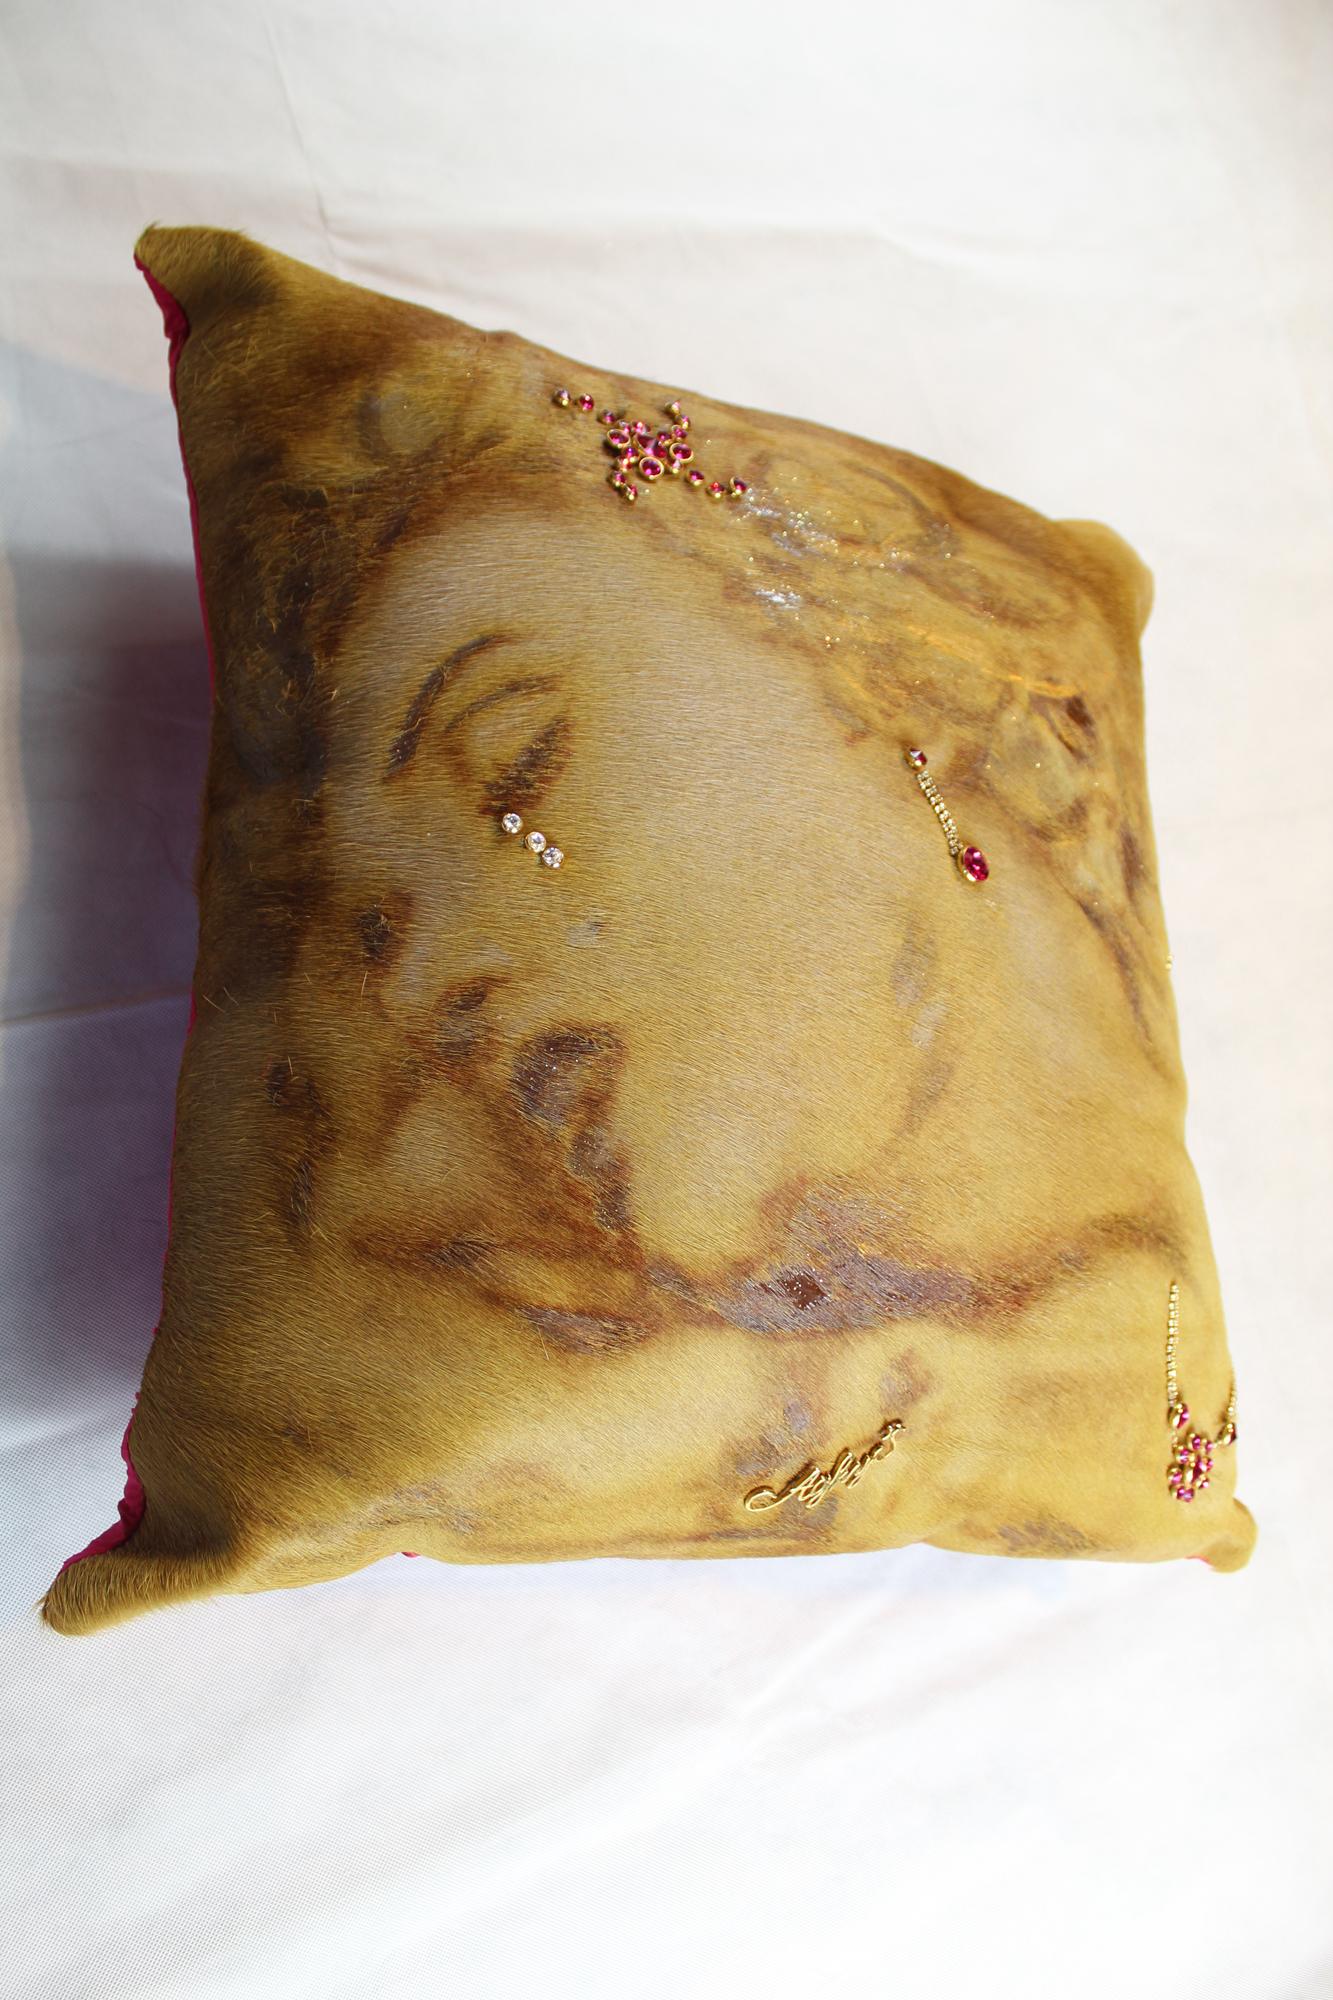 Cushion in cow leather beige with Marilyn Monroe subject hand-painted decorated with original Swarovski crystals. Back cushion covered in Shantung fabric in Fuchsia silk.

Entirely made in Italy.